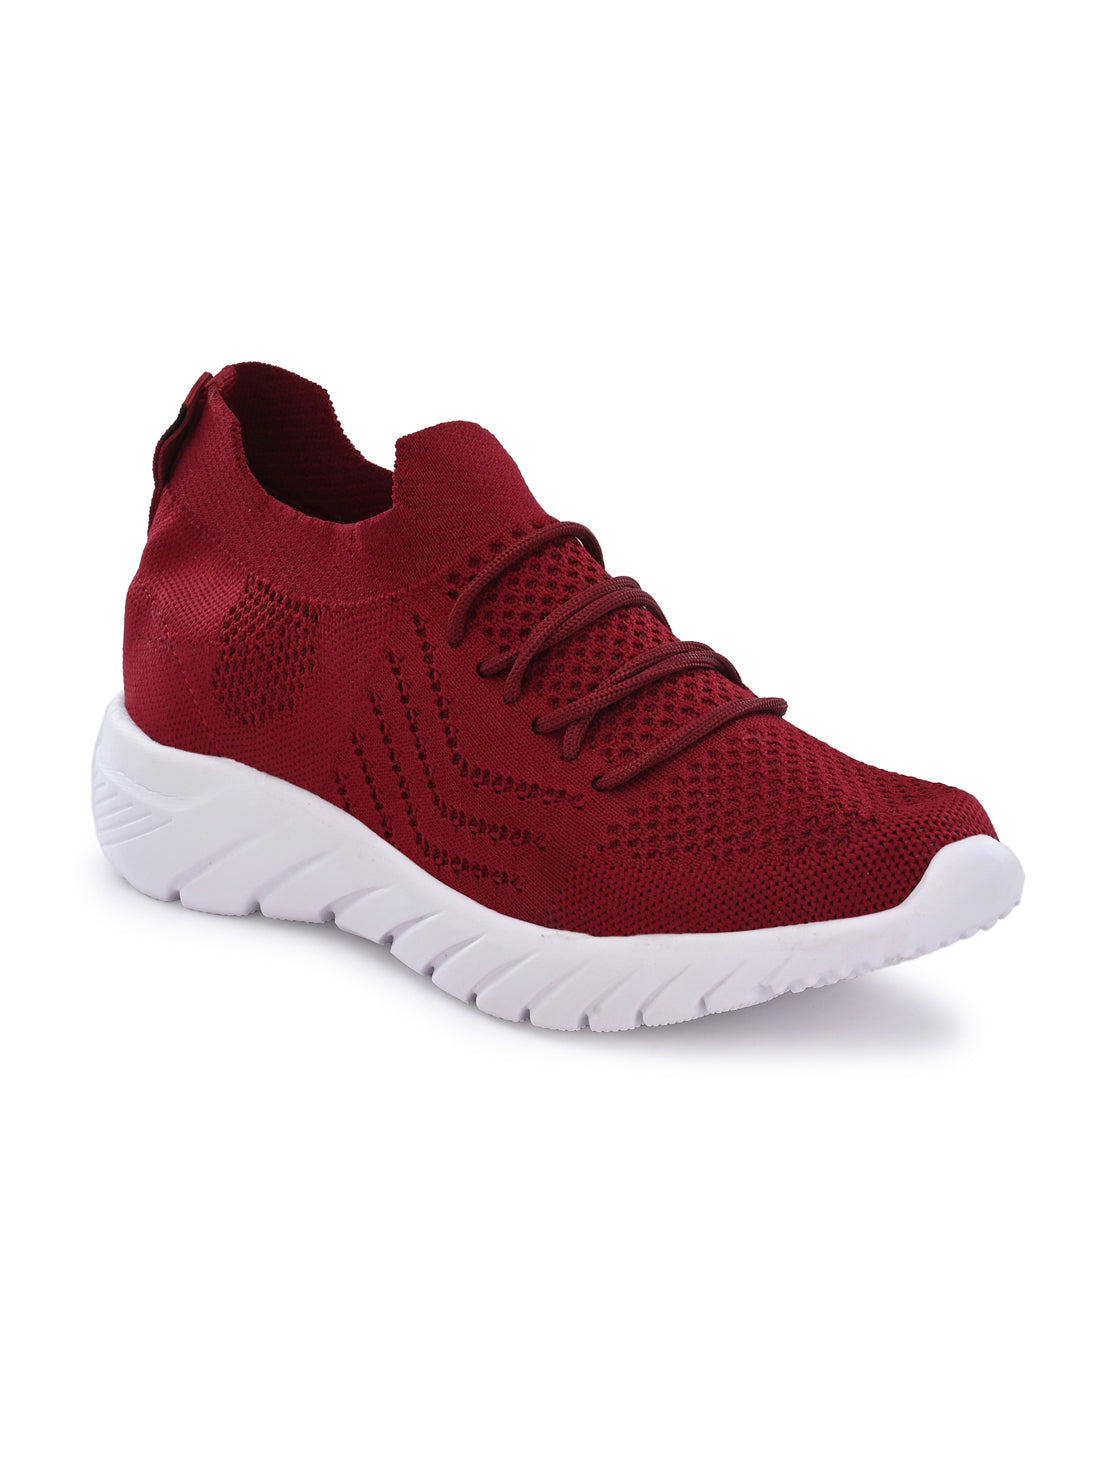 Hirolas® Women Maroon Casual Running Walking Jogging Gym comfortable Athletic Lace-Up Sports_Shoes (HRLWF02MRN)